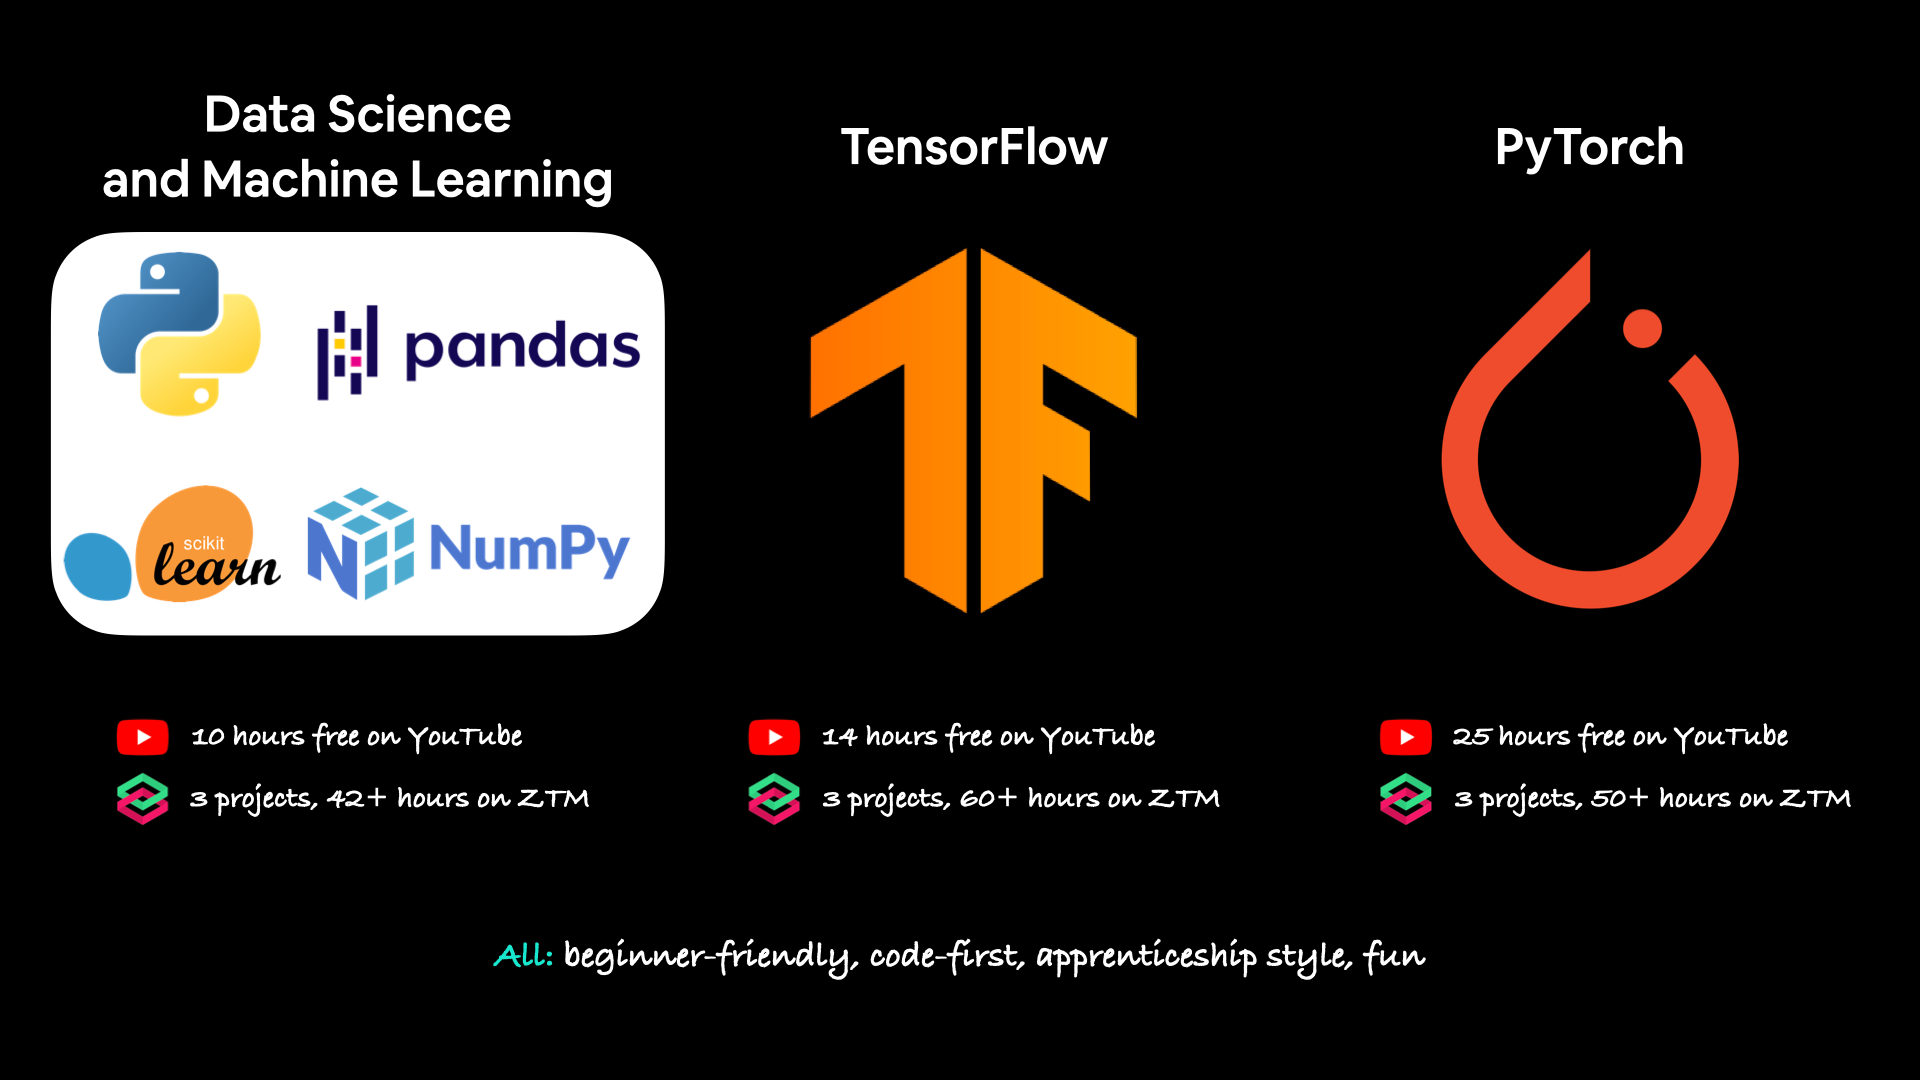 Various machine learning courses taught by Daniel Bourke, from data science and ML to TensorFlow and PyTorch